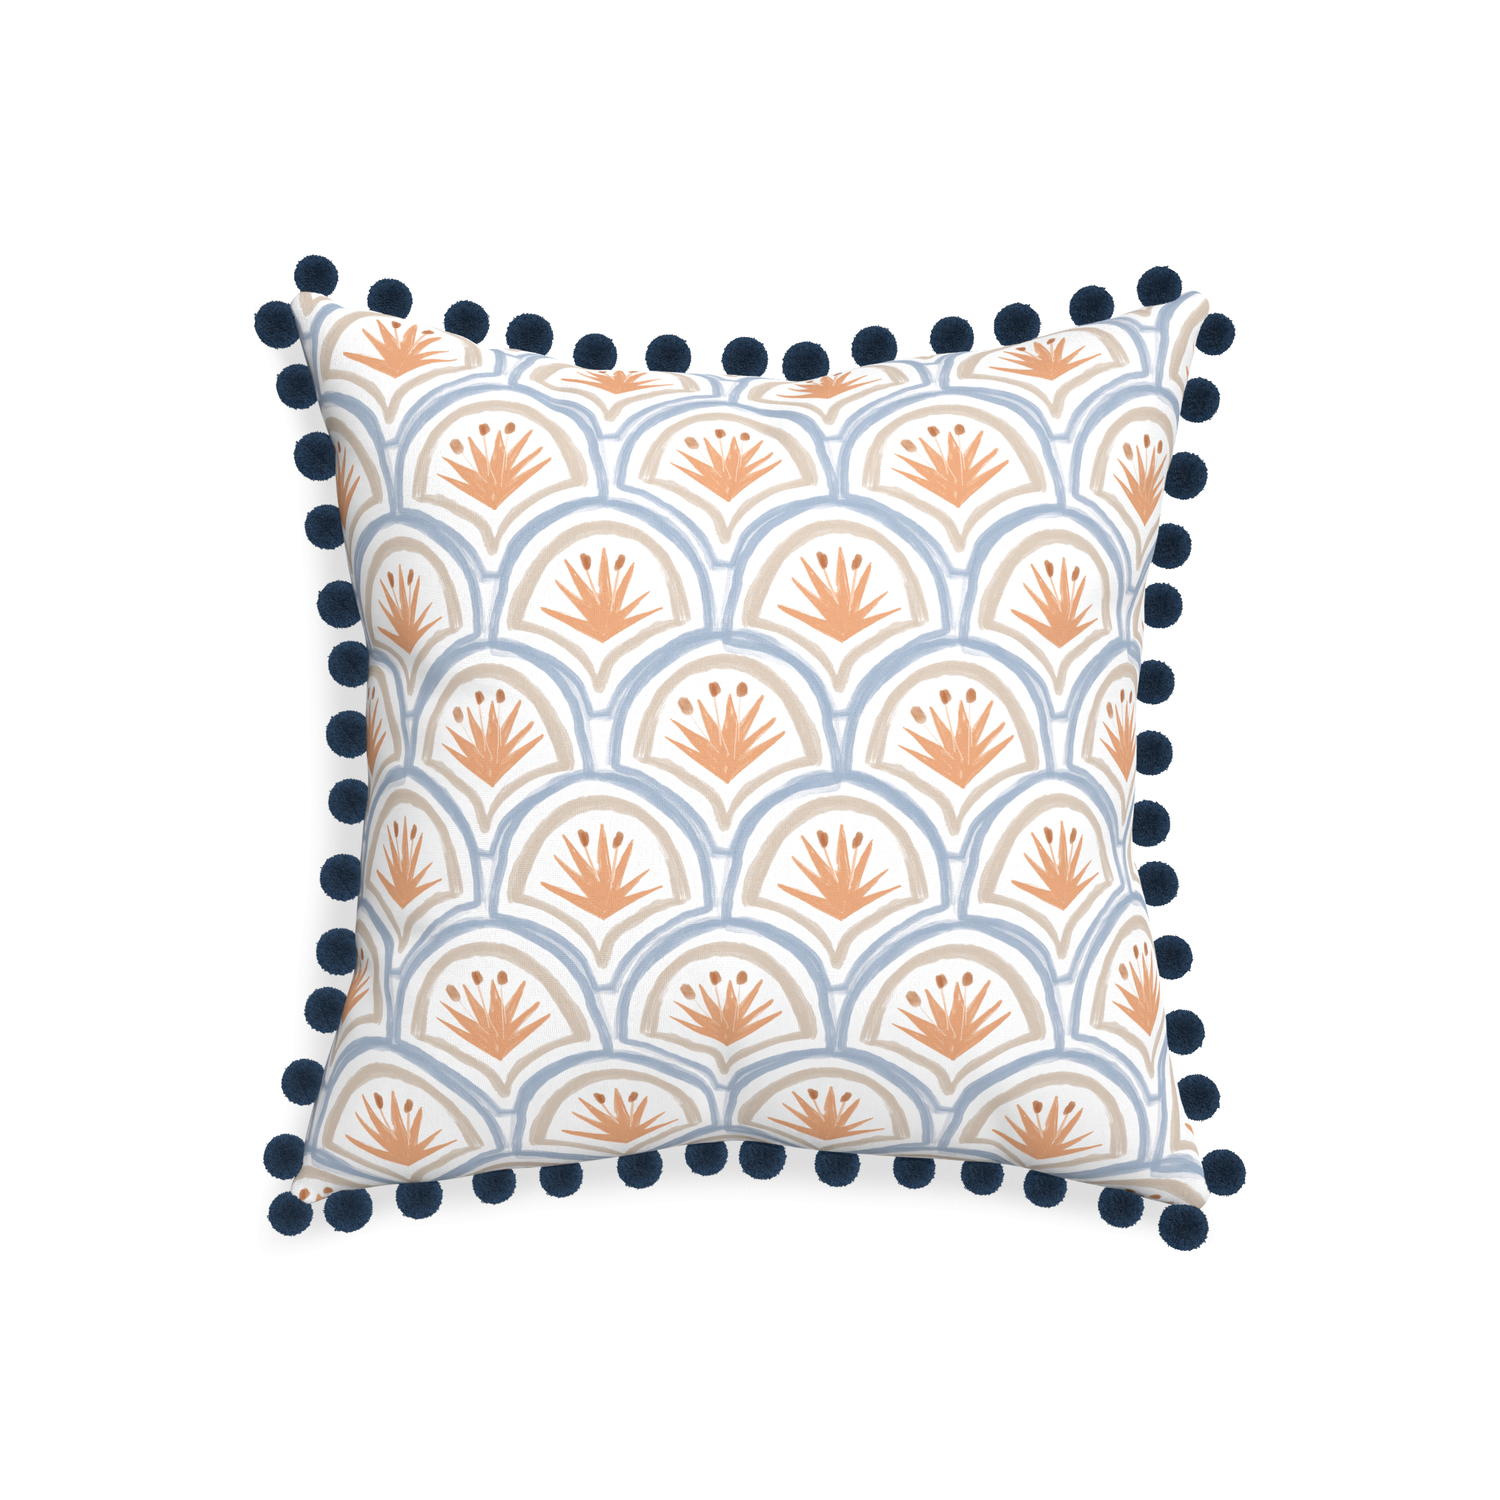 20-square thatcher apricot custom art deco palm patternpillow with c on white background